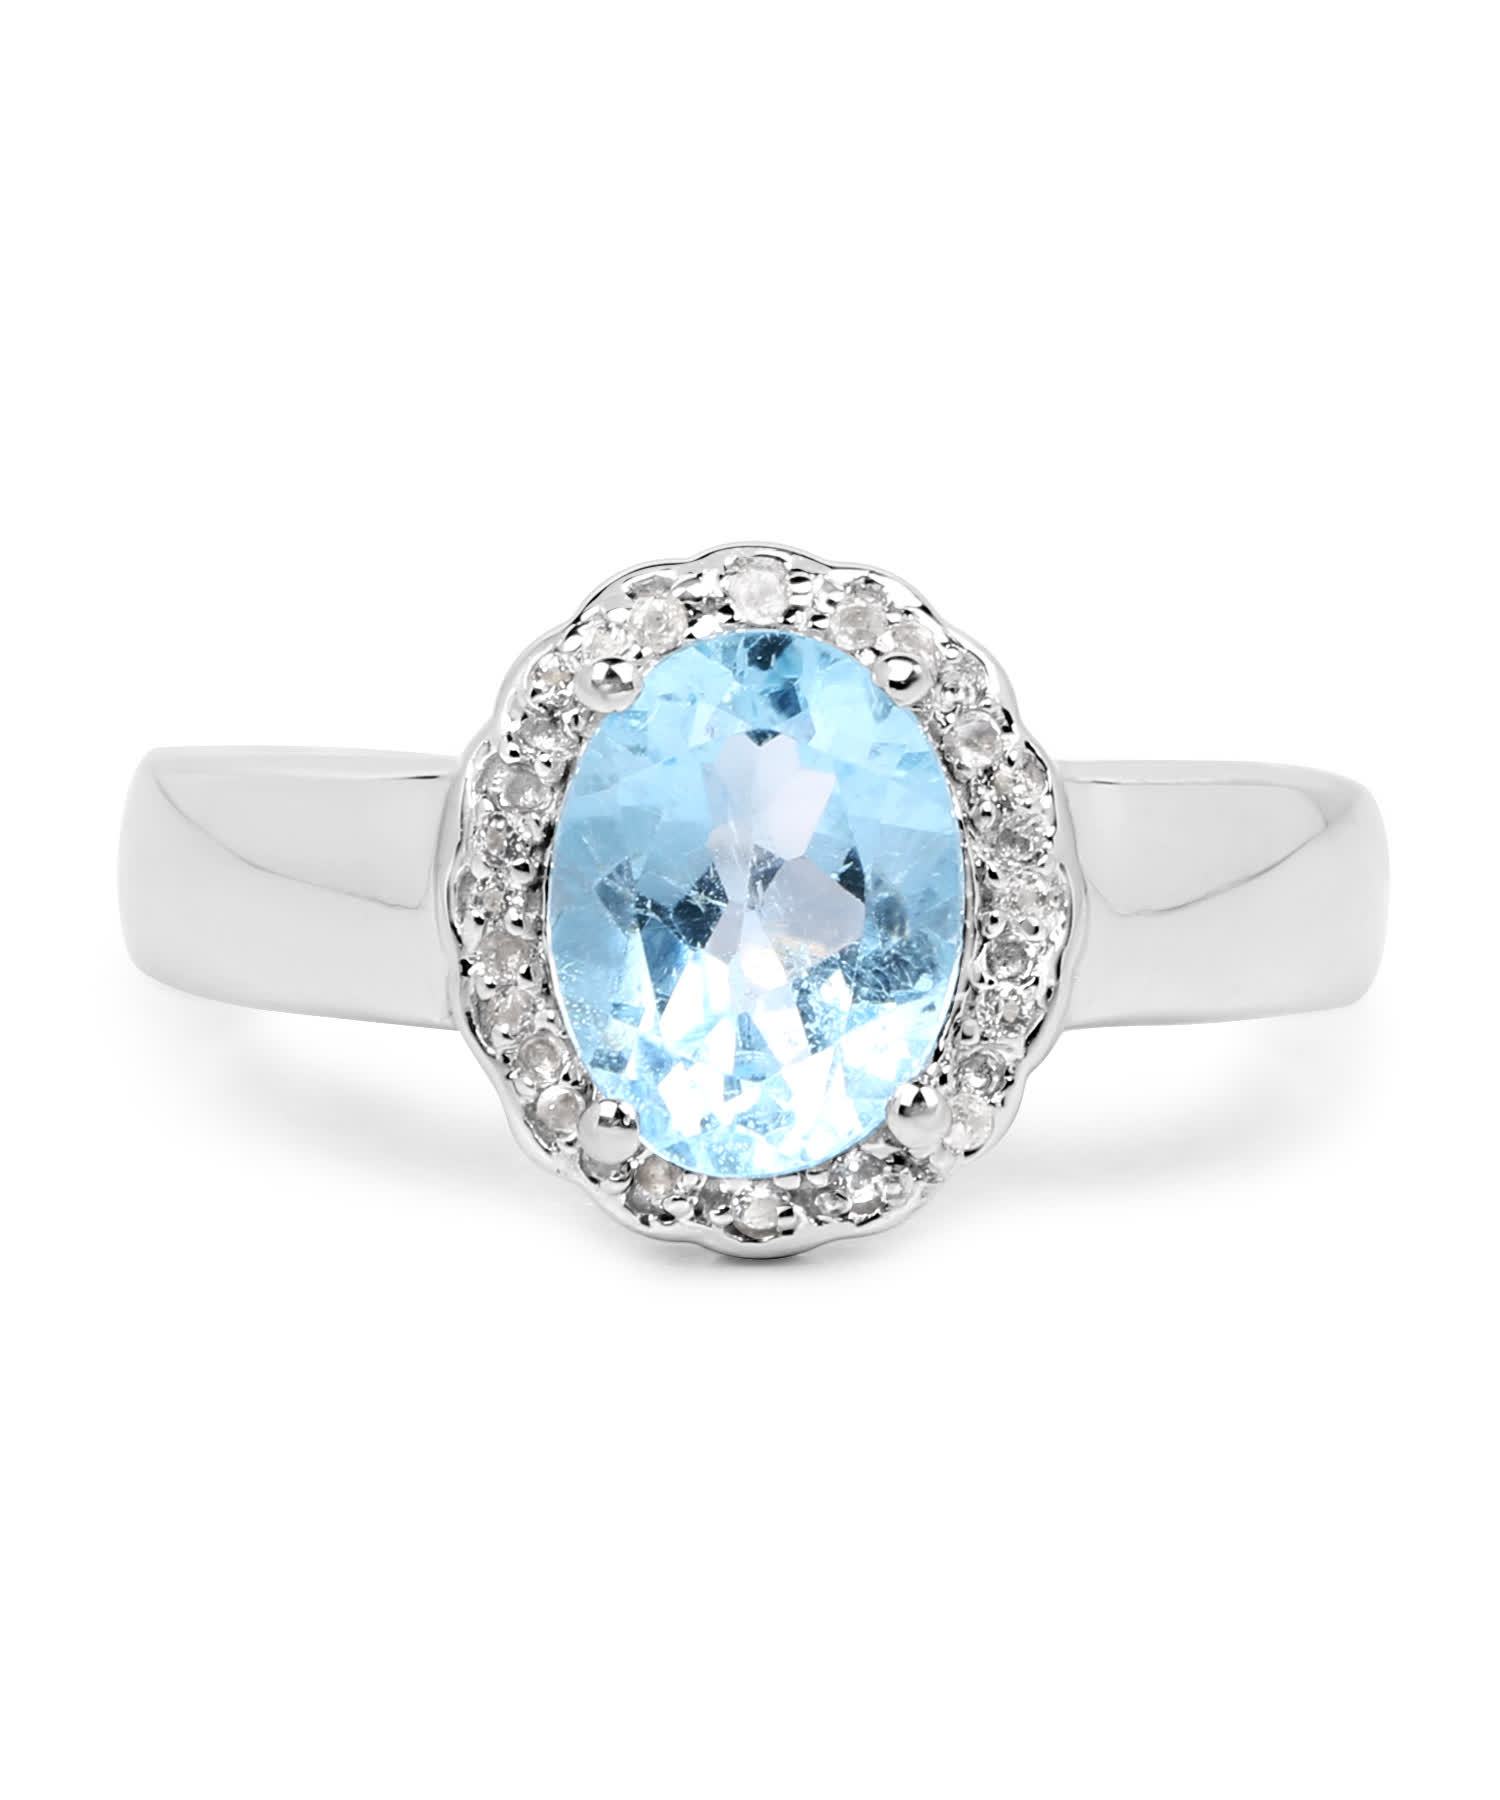 2.58ctw Natural Sky Blue Topaz Rhodium Plated 925 Sterling Silver Ring View 3